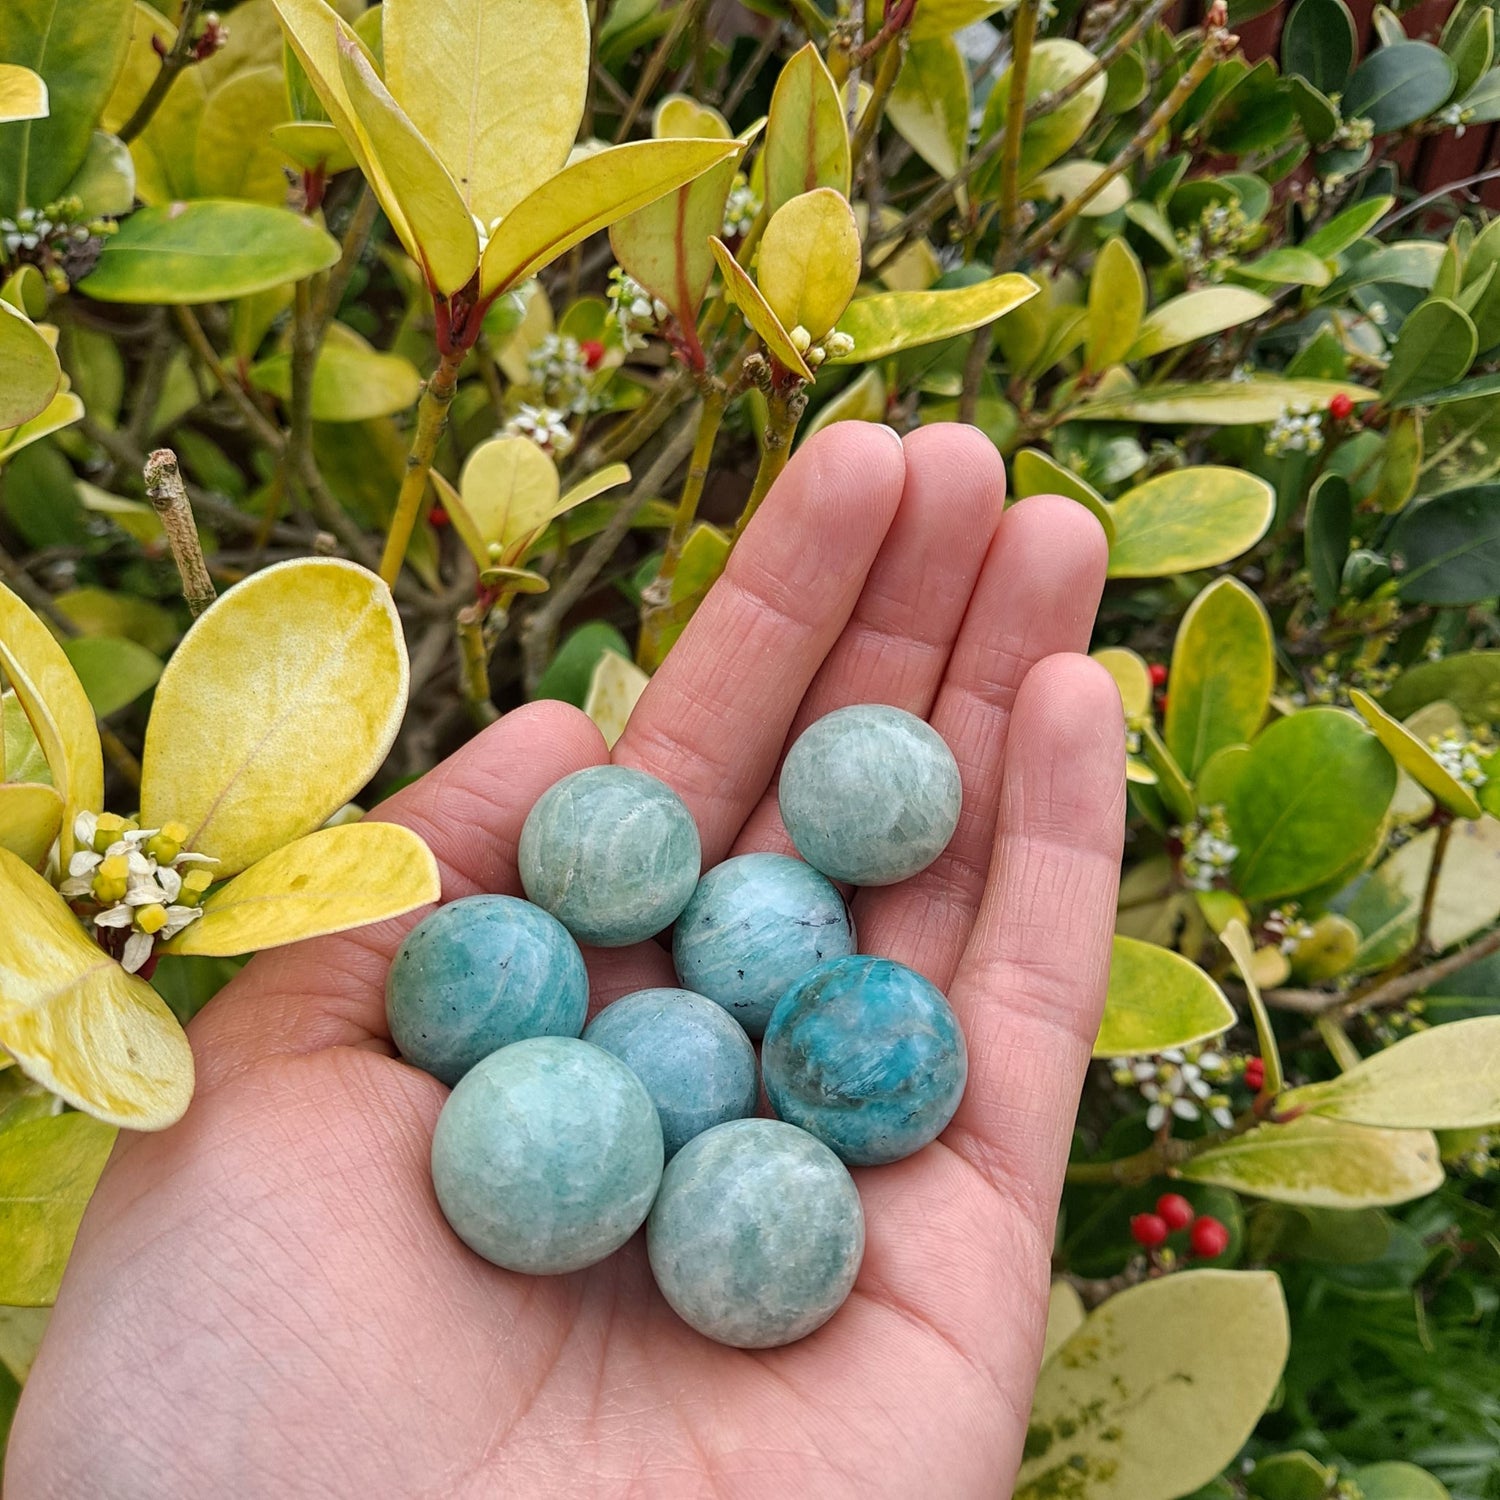 amazonite mini spheres held in a hand, green leaves in the background